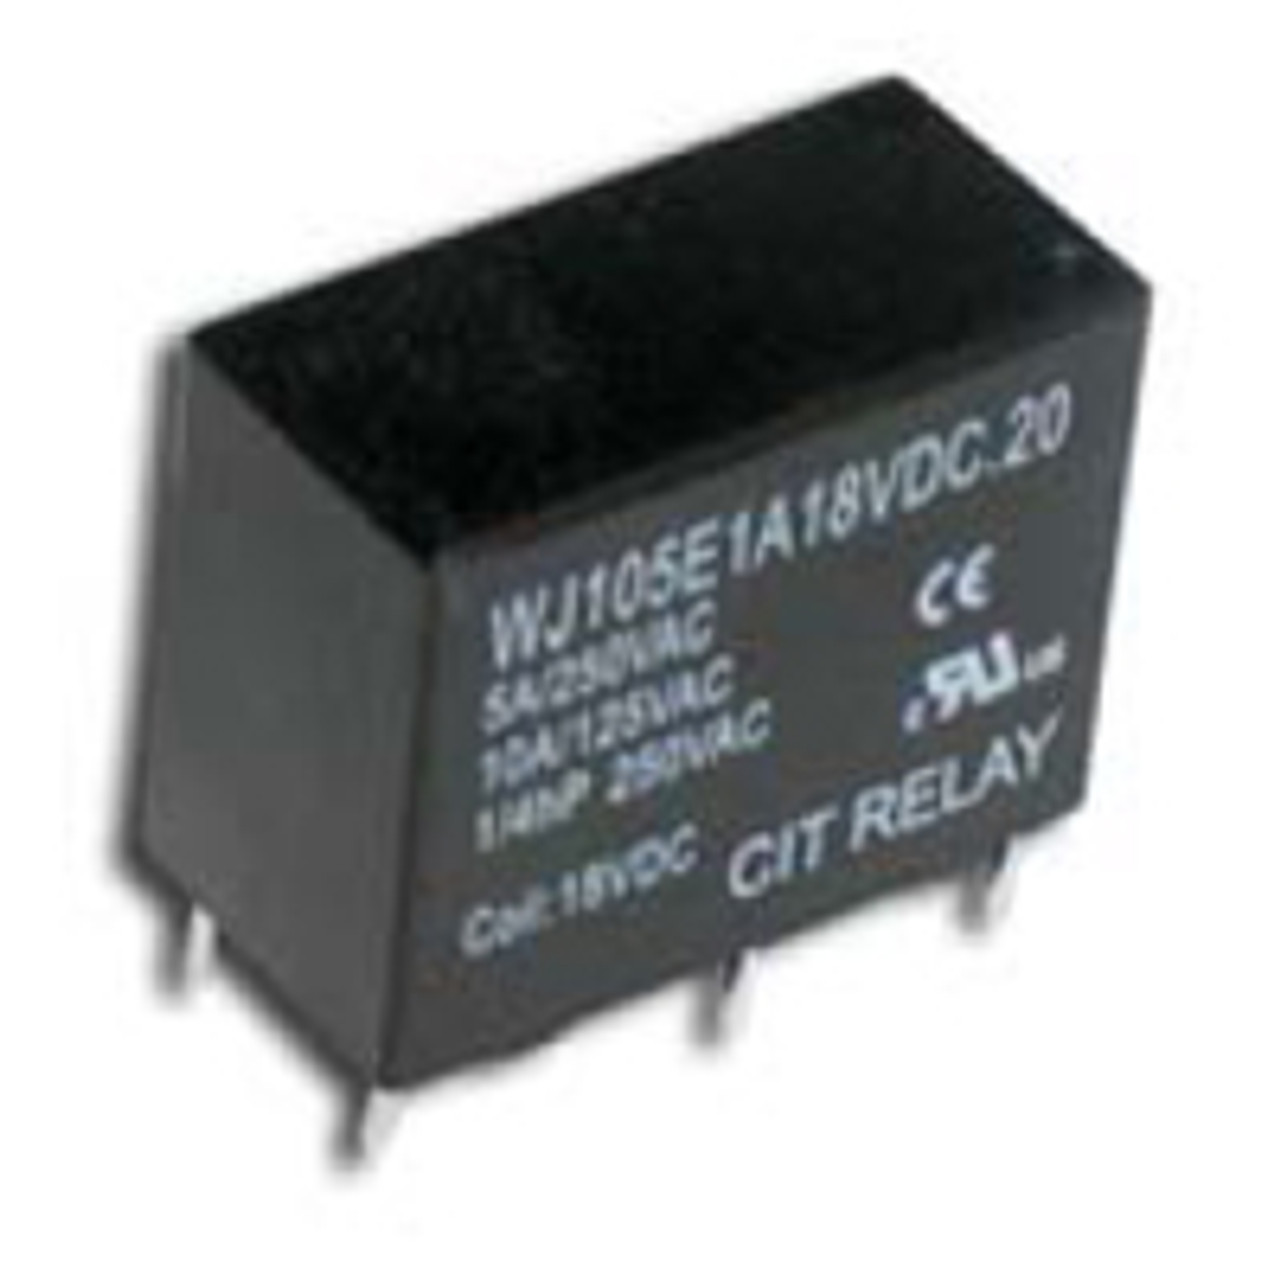 CIT Relay and Switch J105E1A12VDC.45 General Purpose Relays